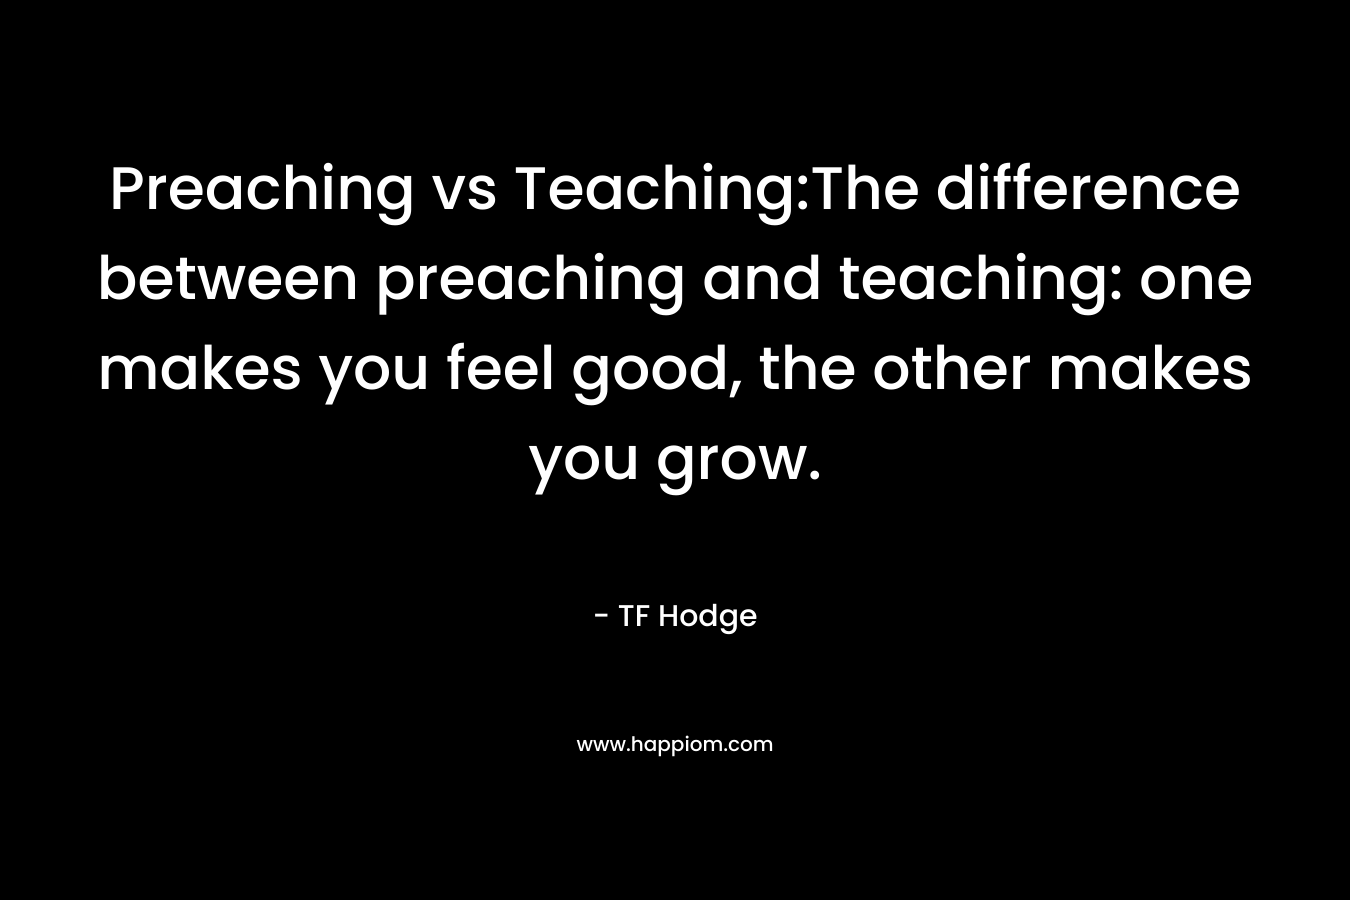 Preaching vs Teaching:The difference between preaching and teaching: one makes you feel good, the other makes you grow.